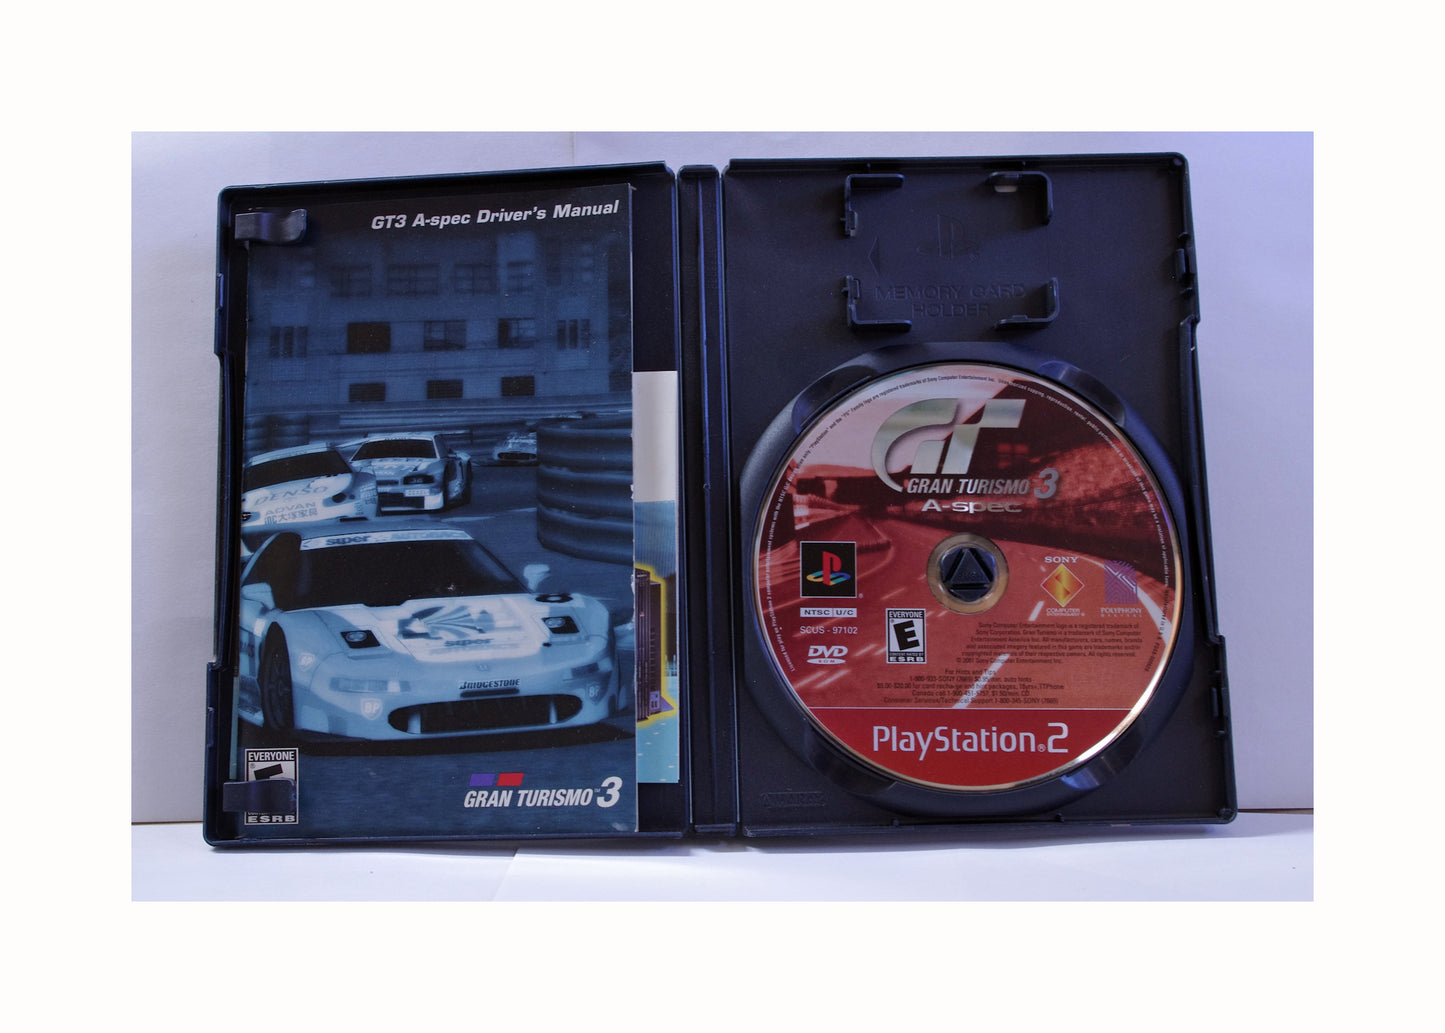 PlayStation 2 Game - Gran Turismo 3 A-Spec